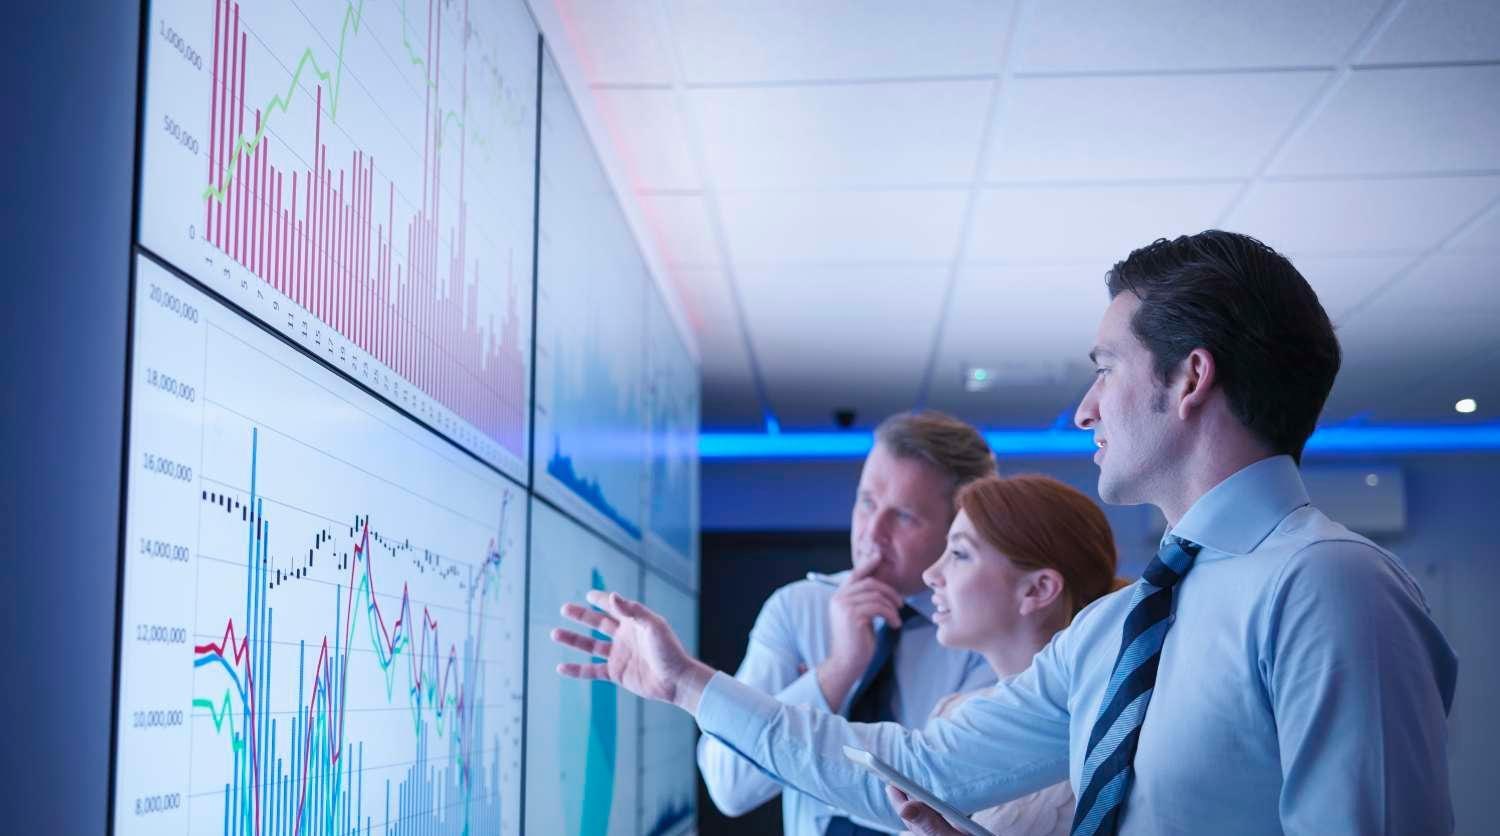 Three business people discuss graphs on screen in meeting room   